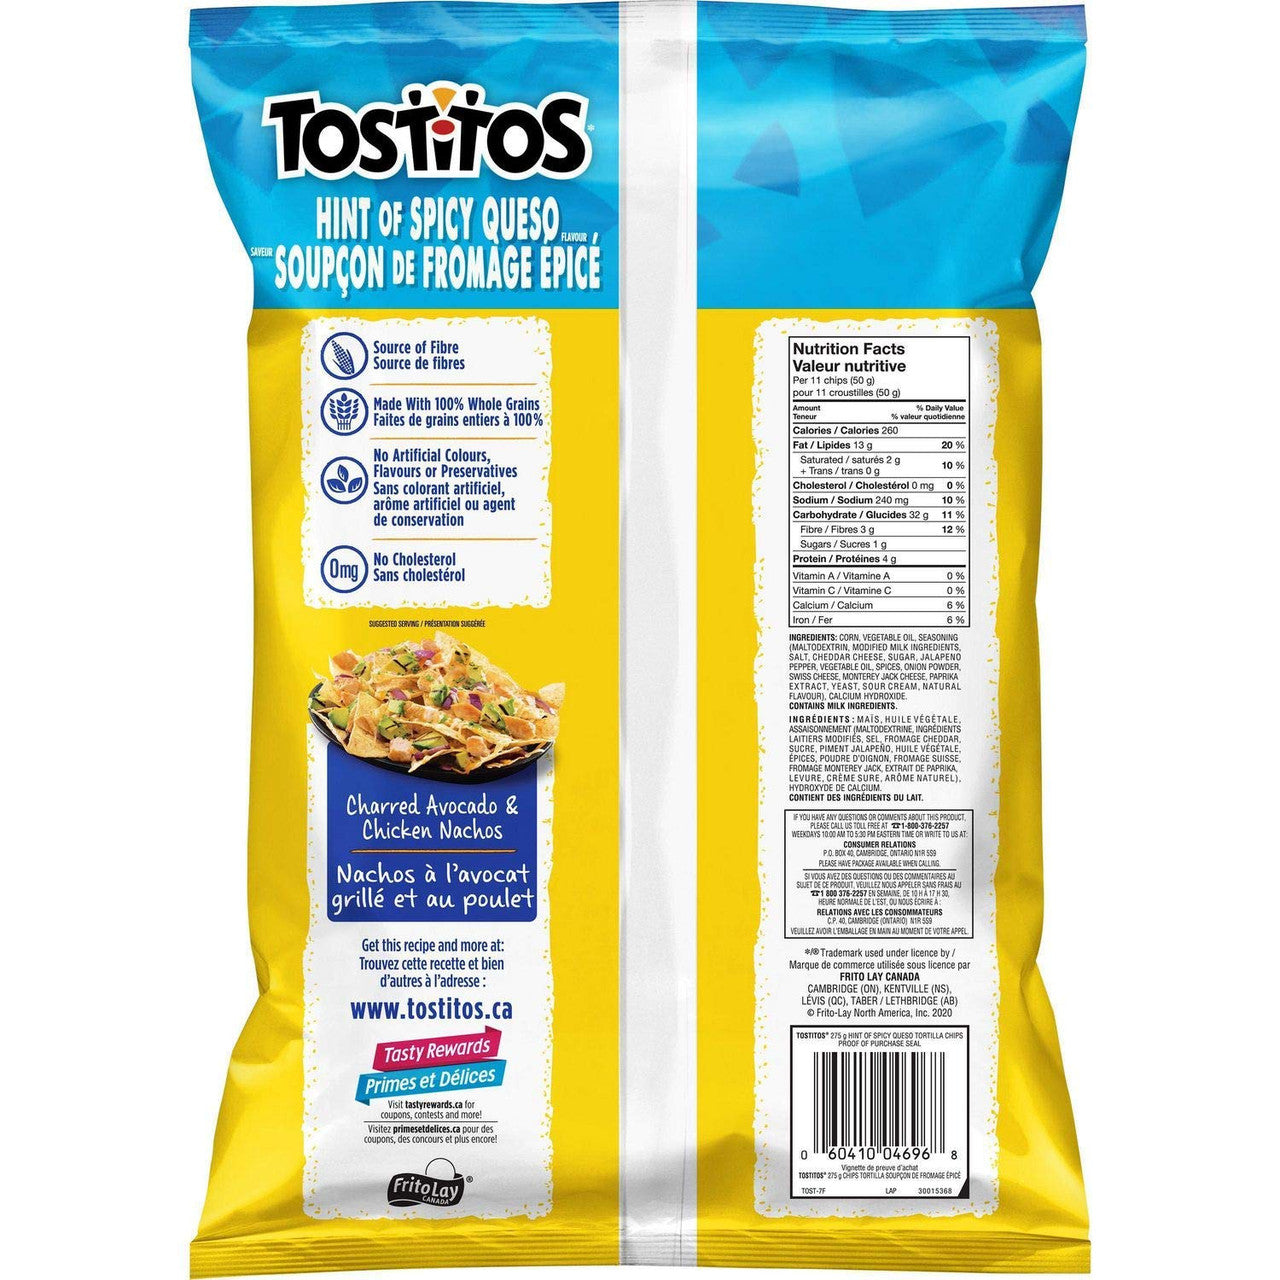 Tostitos Hint of Spicy Queso Tortilla Chips 275g/9.7oz, 3-Pack {Imported from Canada}